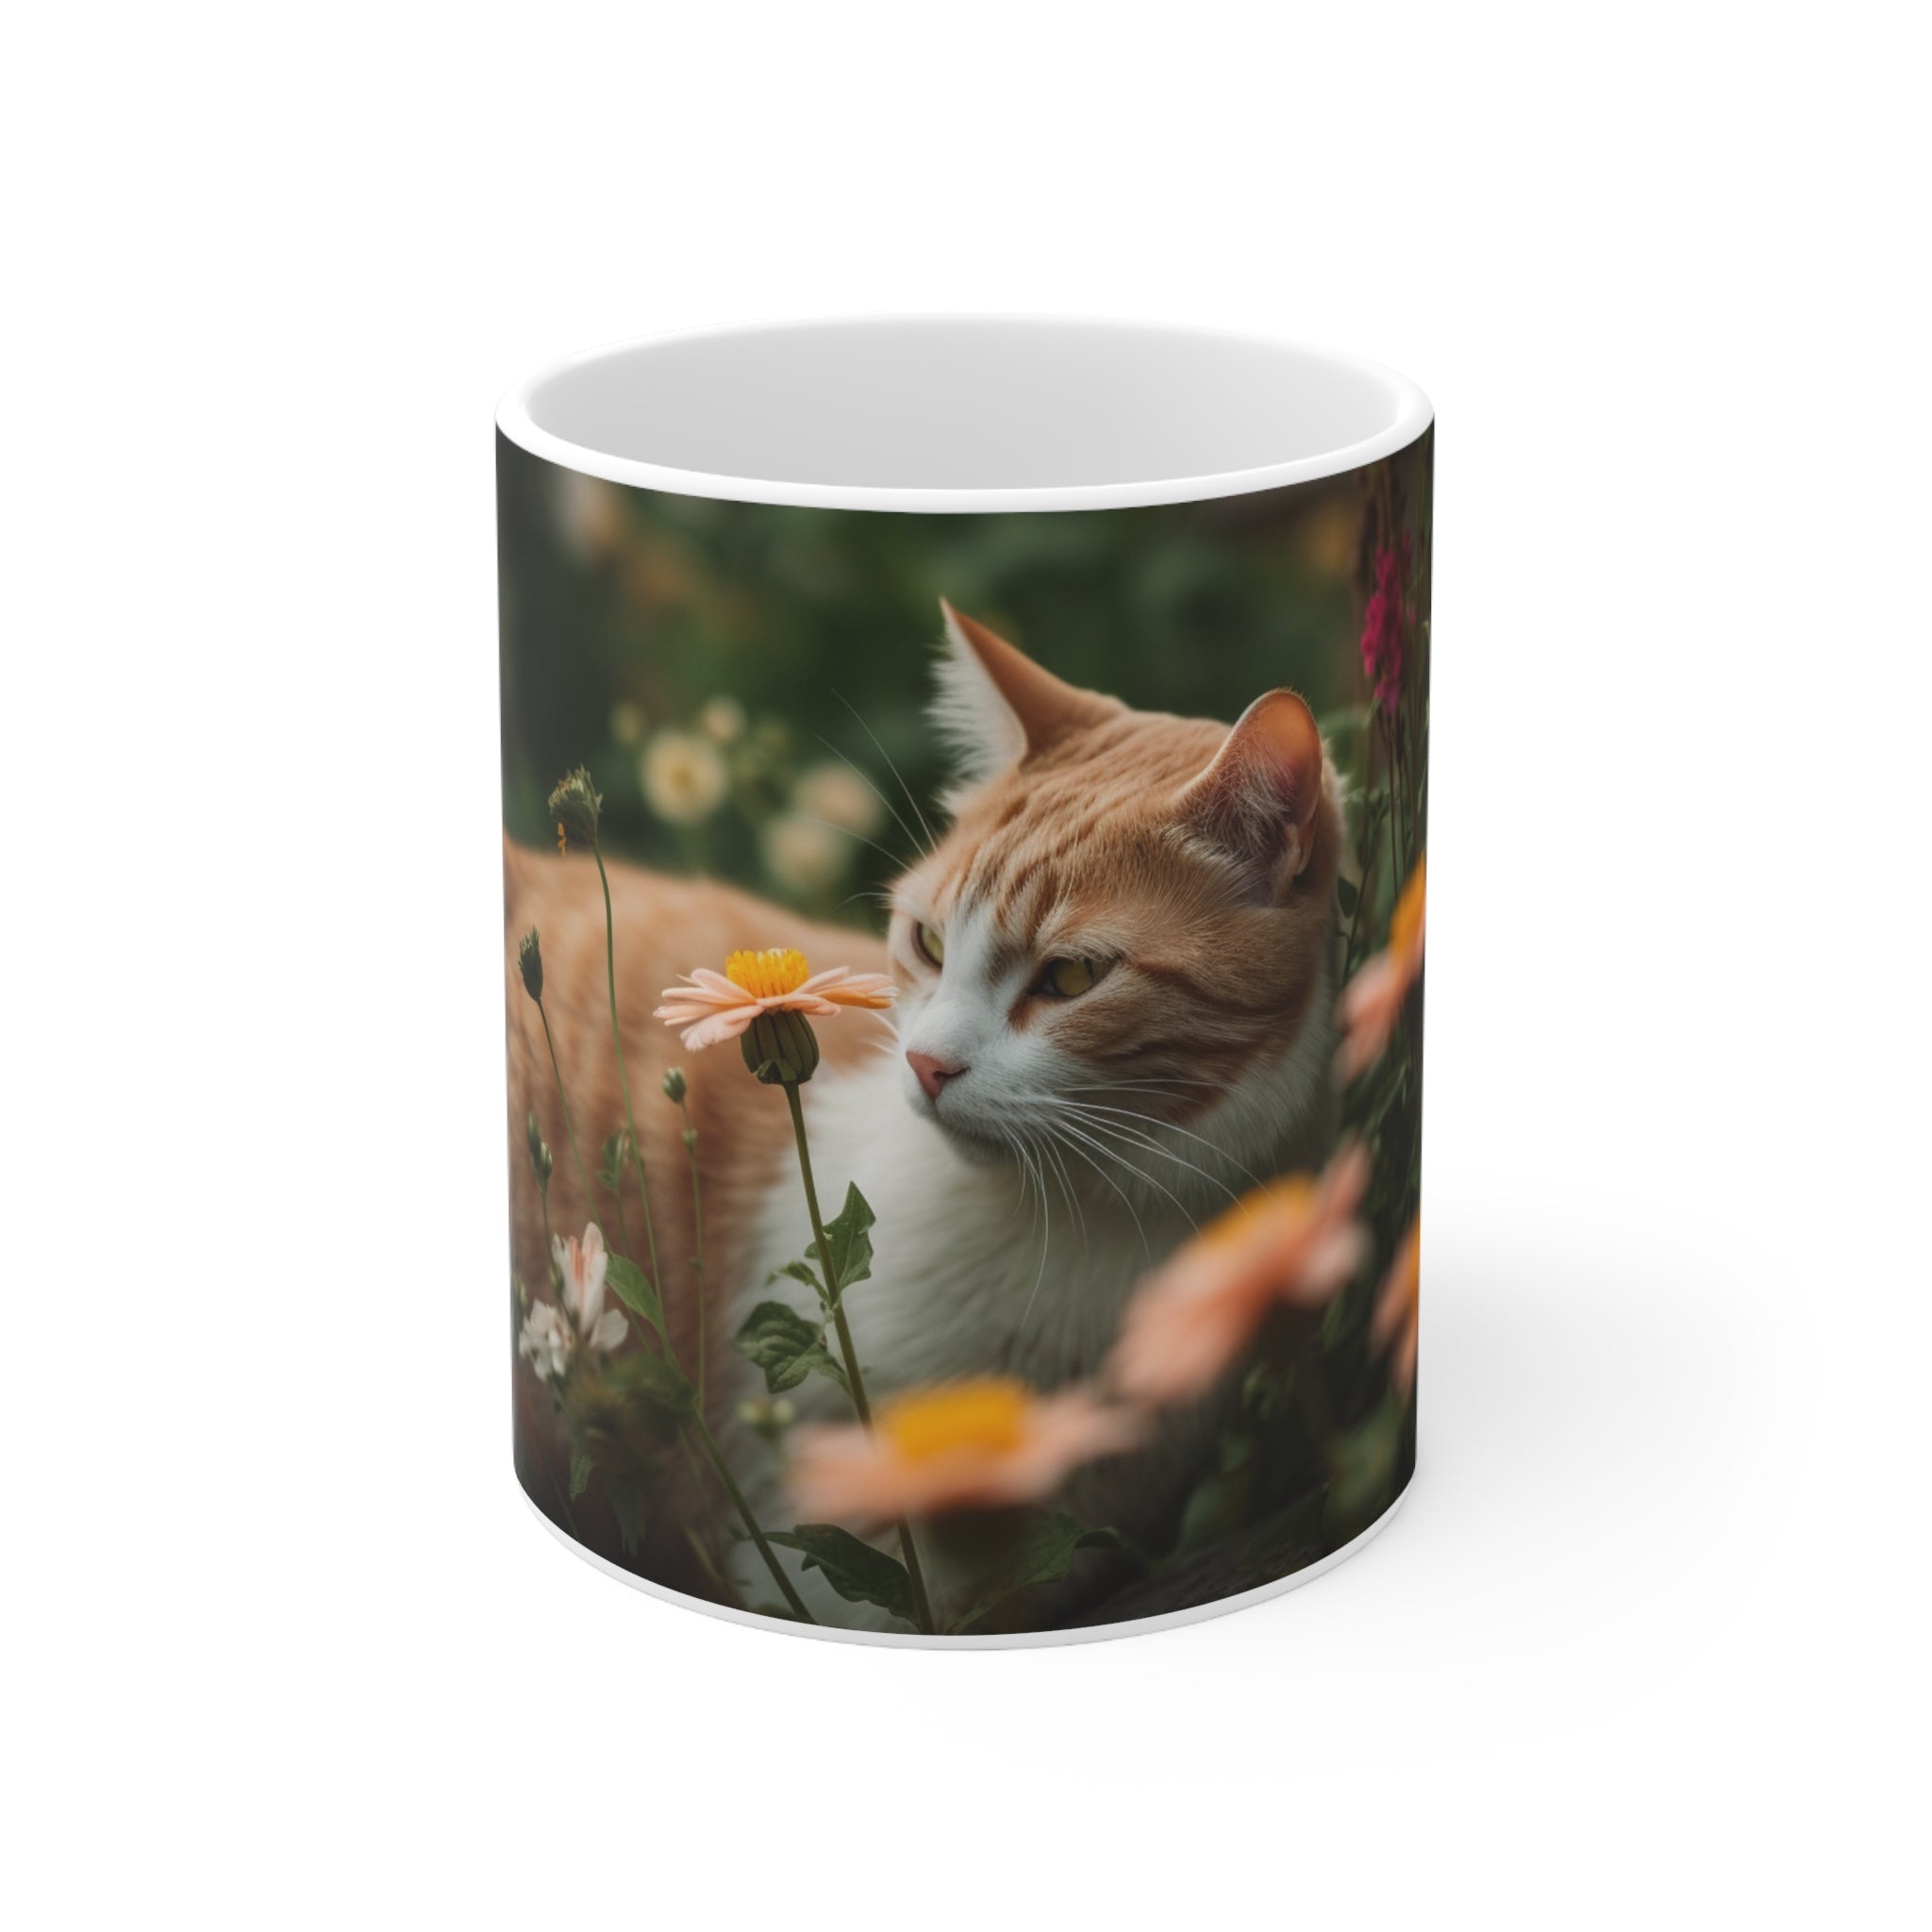 Perfect Gift for Cat Lovers  Adorable Garden Cat Feline Party Ceramic Mug 11oz - Garden Enthusiasts Gift for Pet Lovers and Cat Owners